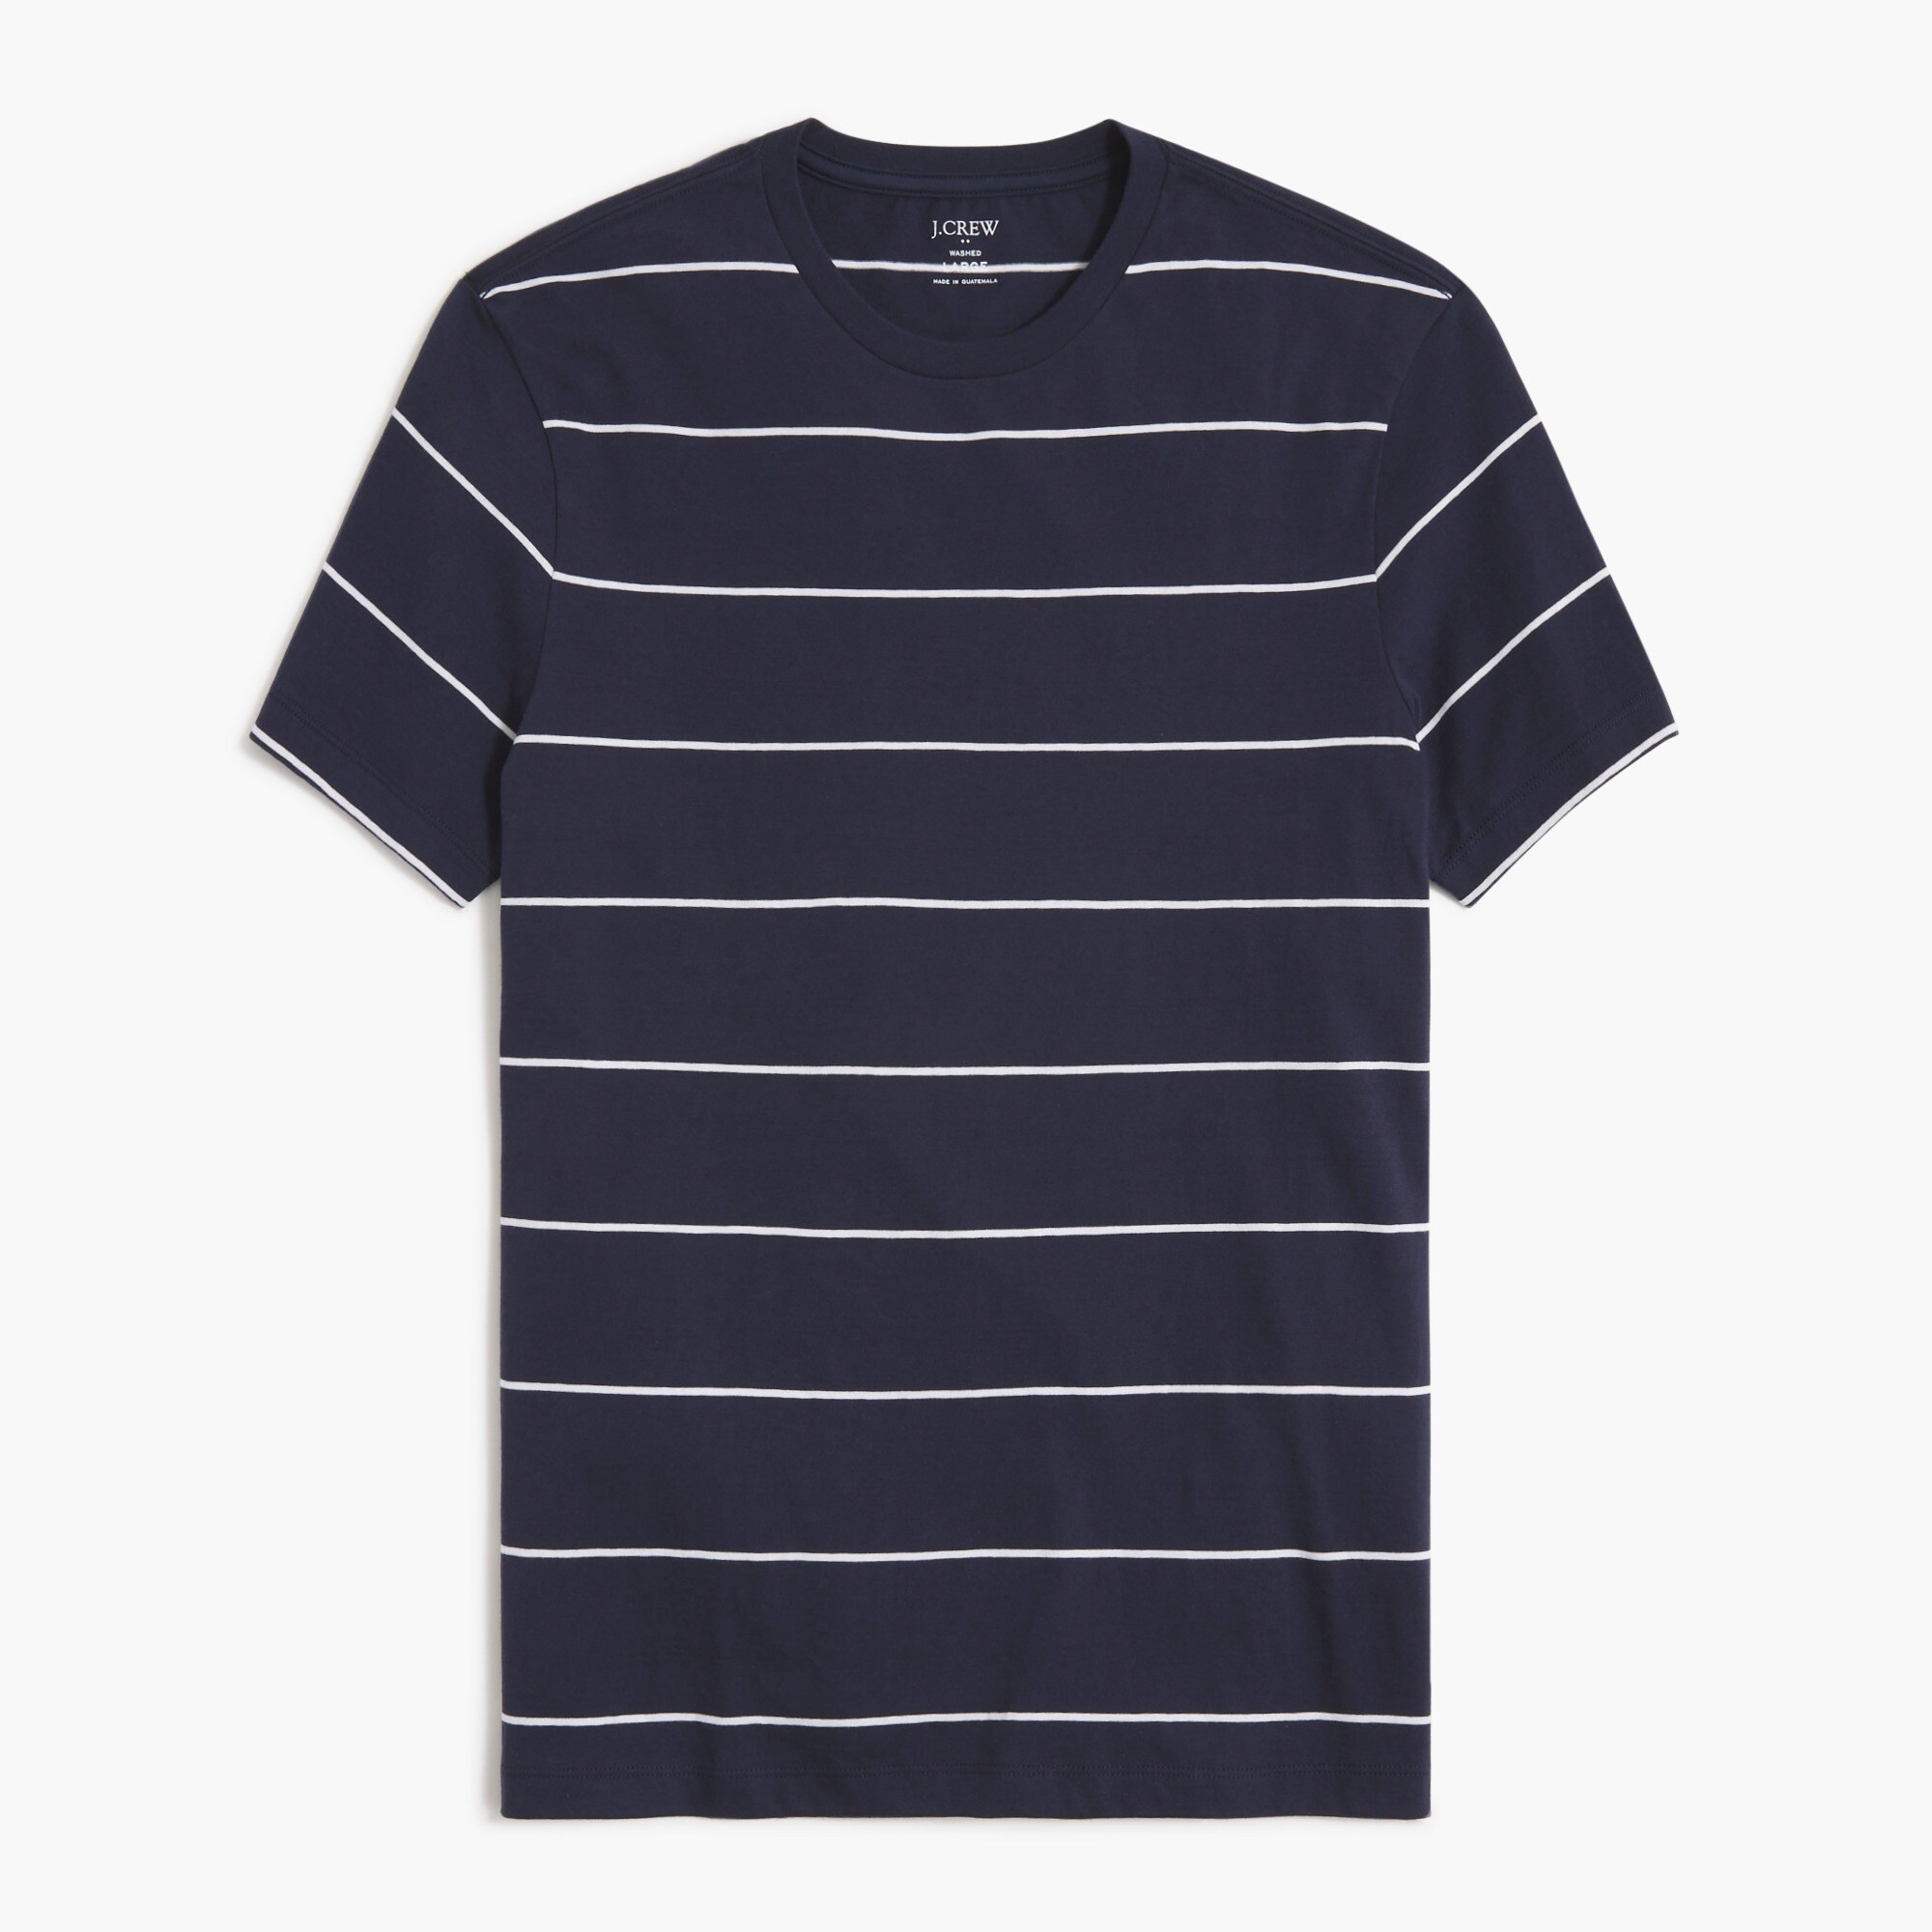  Striped washed jersey tee